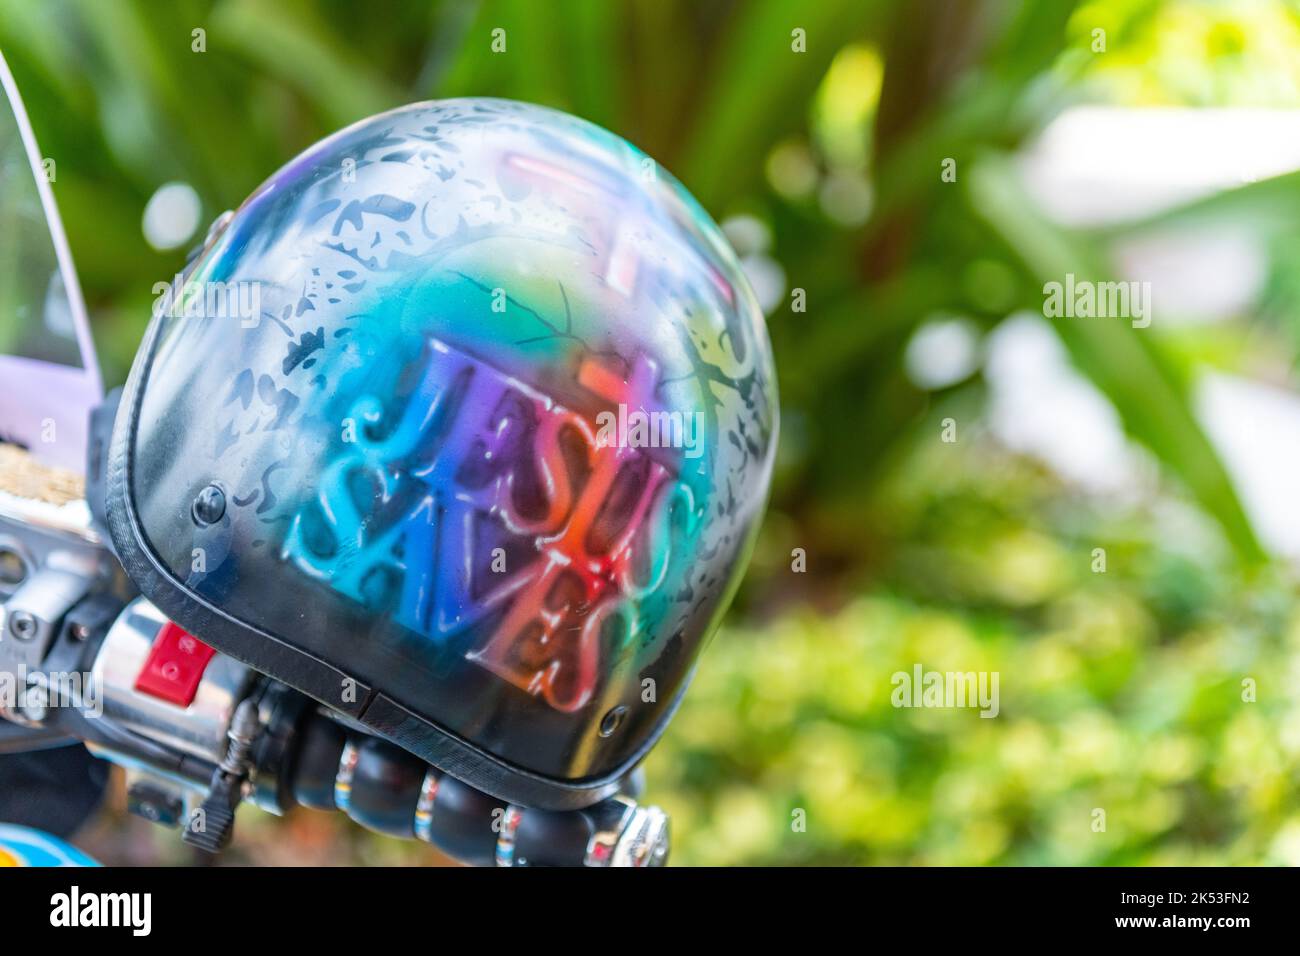 Motorcycle with Christian messages, Florida, USA Stock Photo